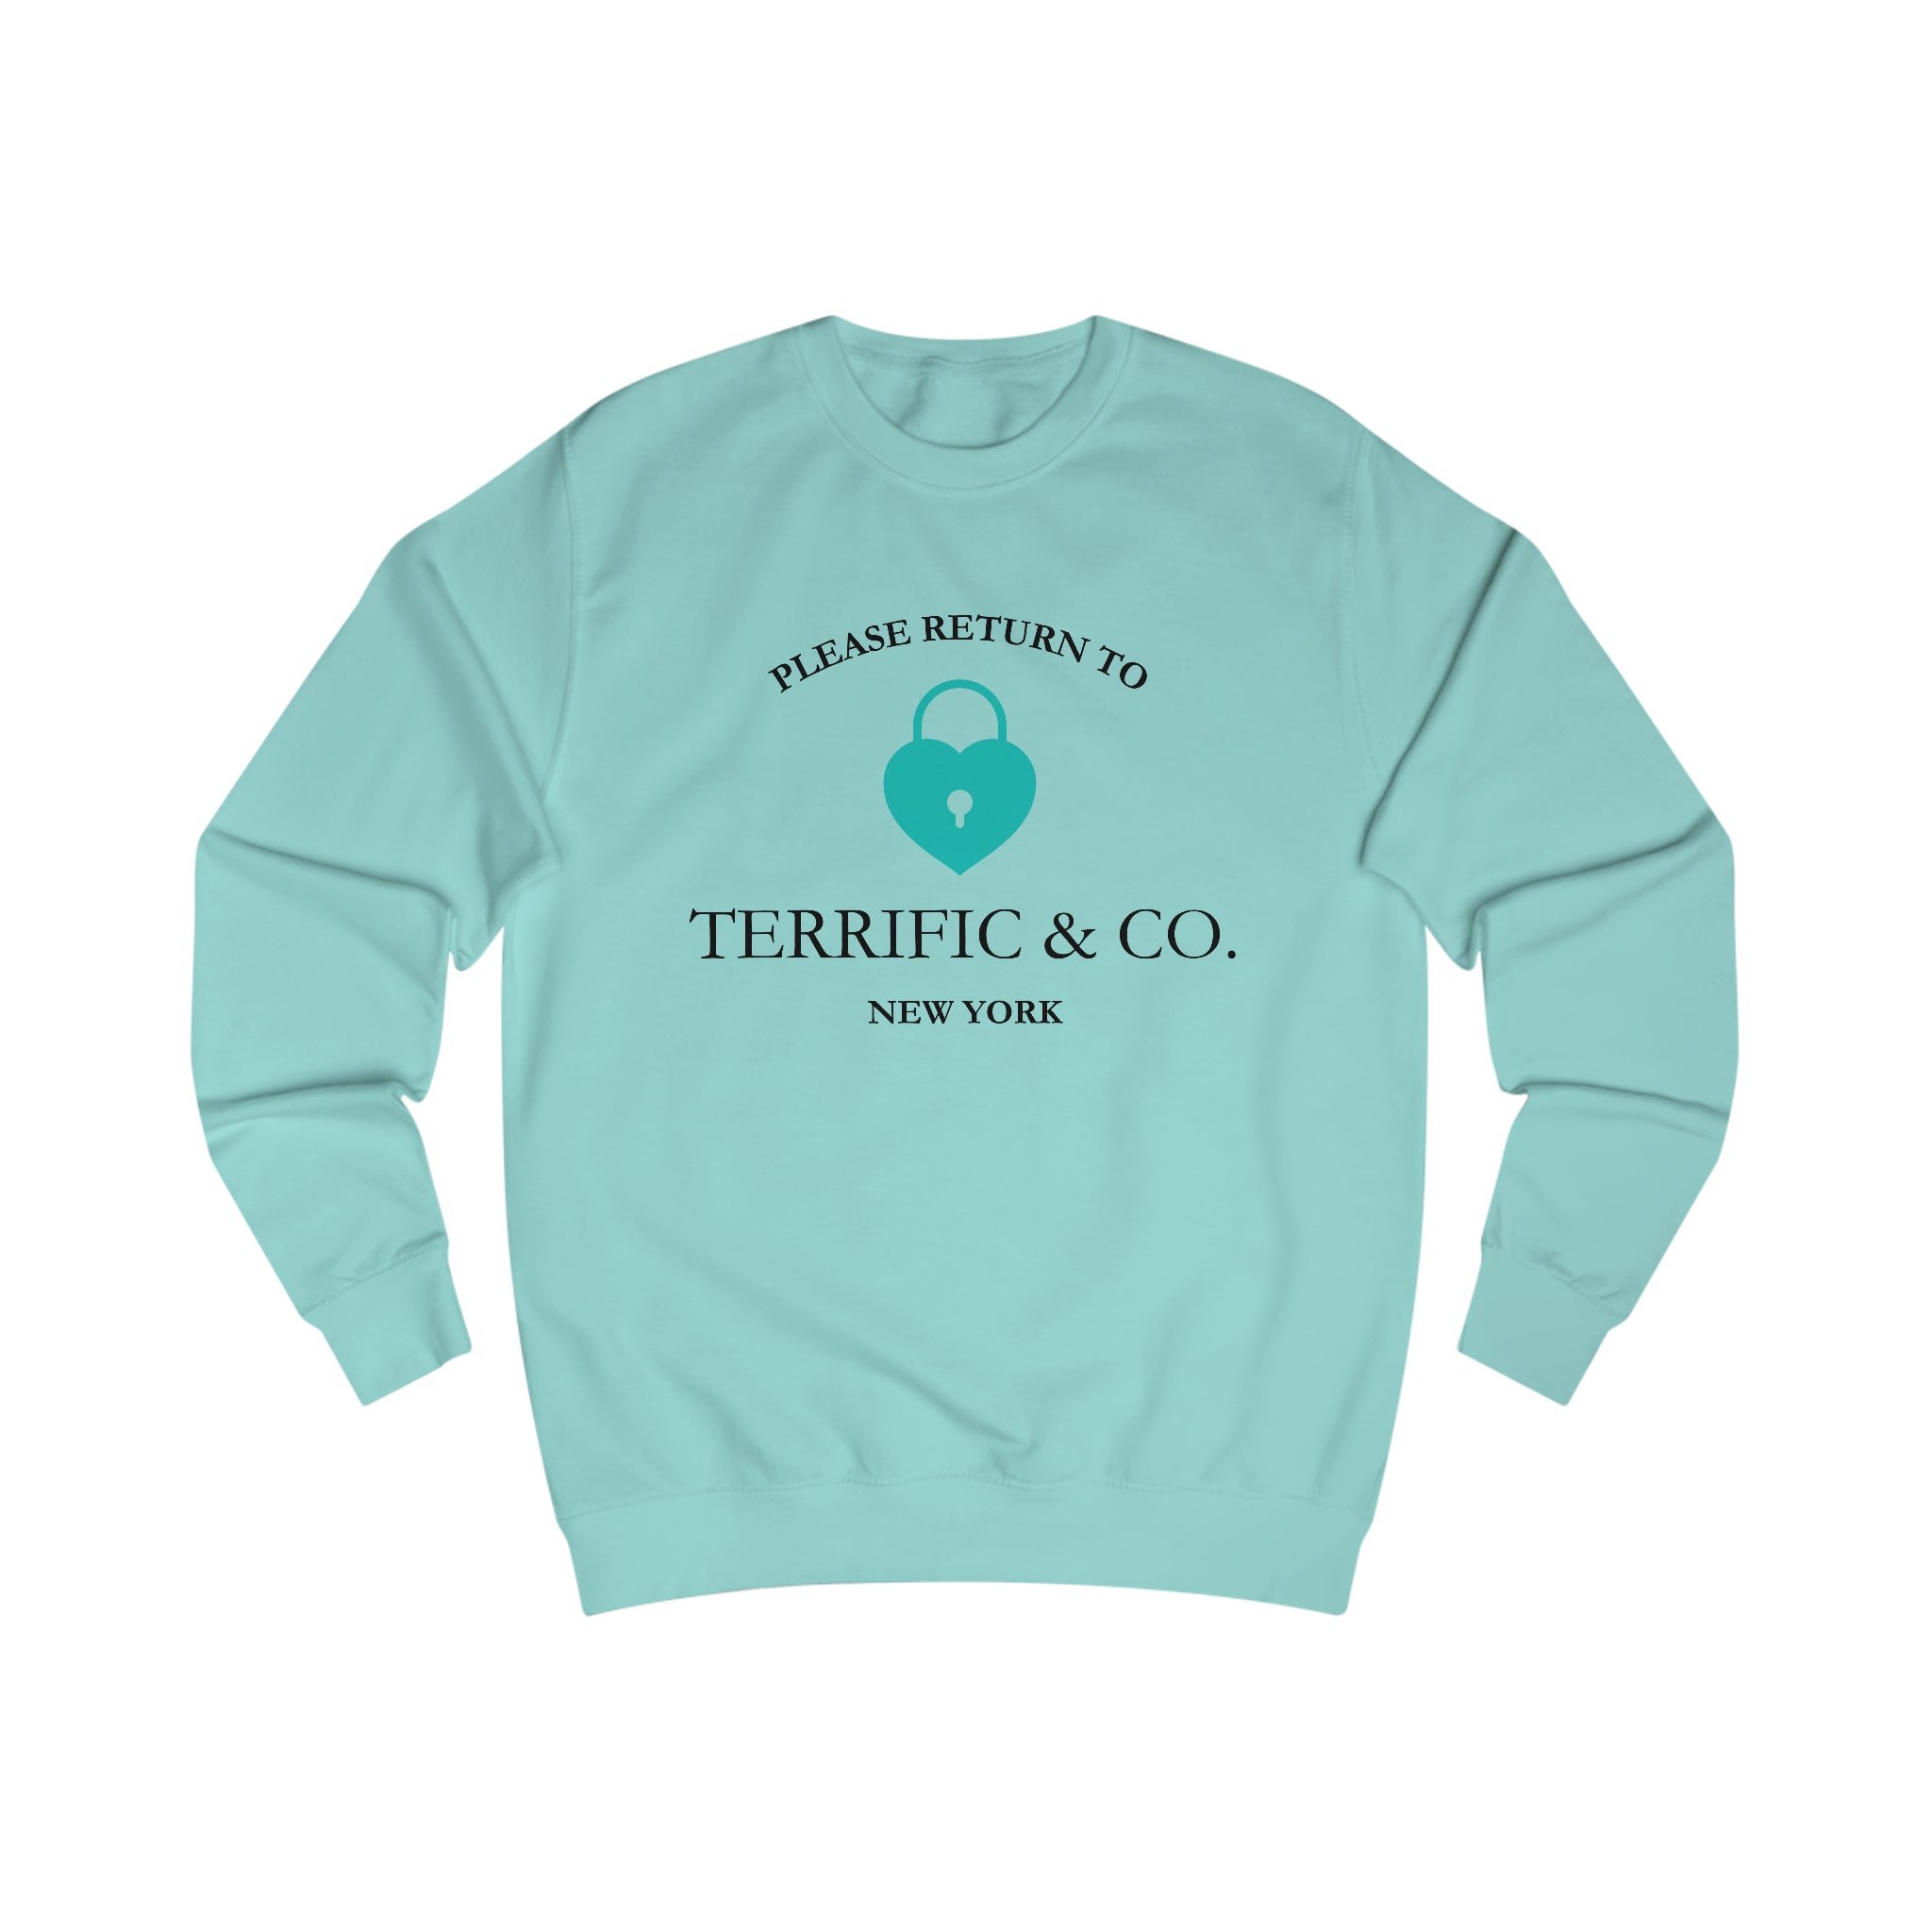 Please Return To Terrific and Co. (Heart Lock) Designer inspired Relaxed Fit Unisex Sweatshirt Sweatshirt Peppermint-2XL The Middle Aged Groove